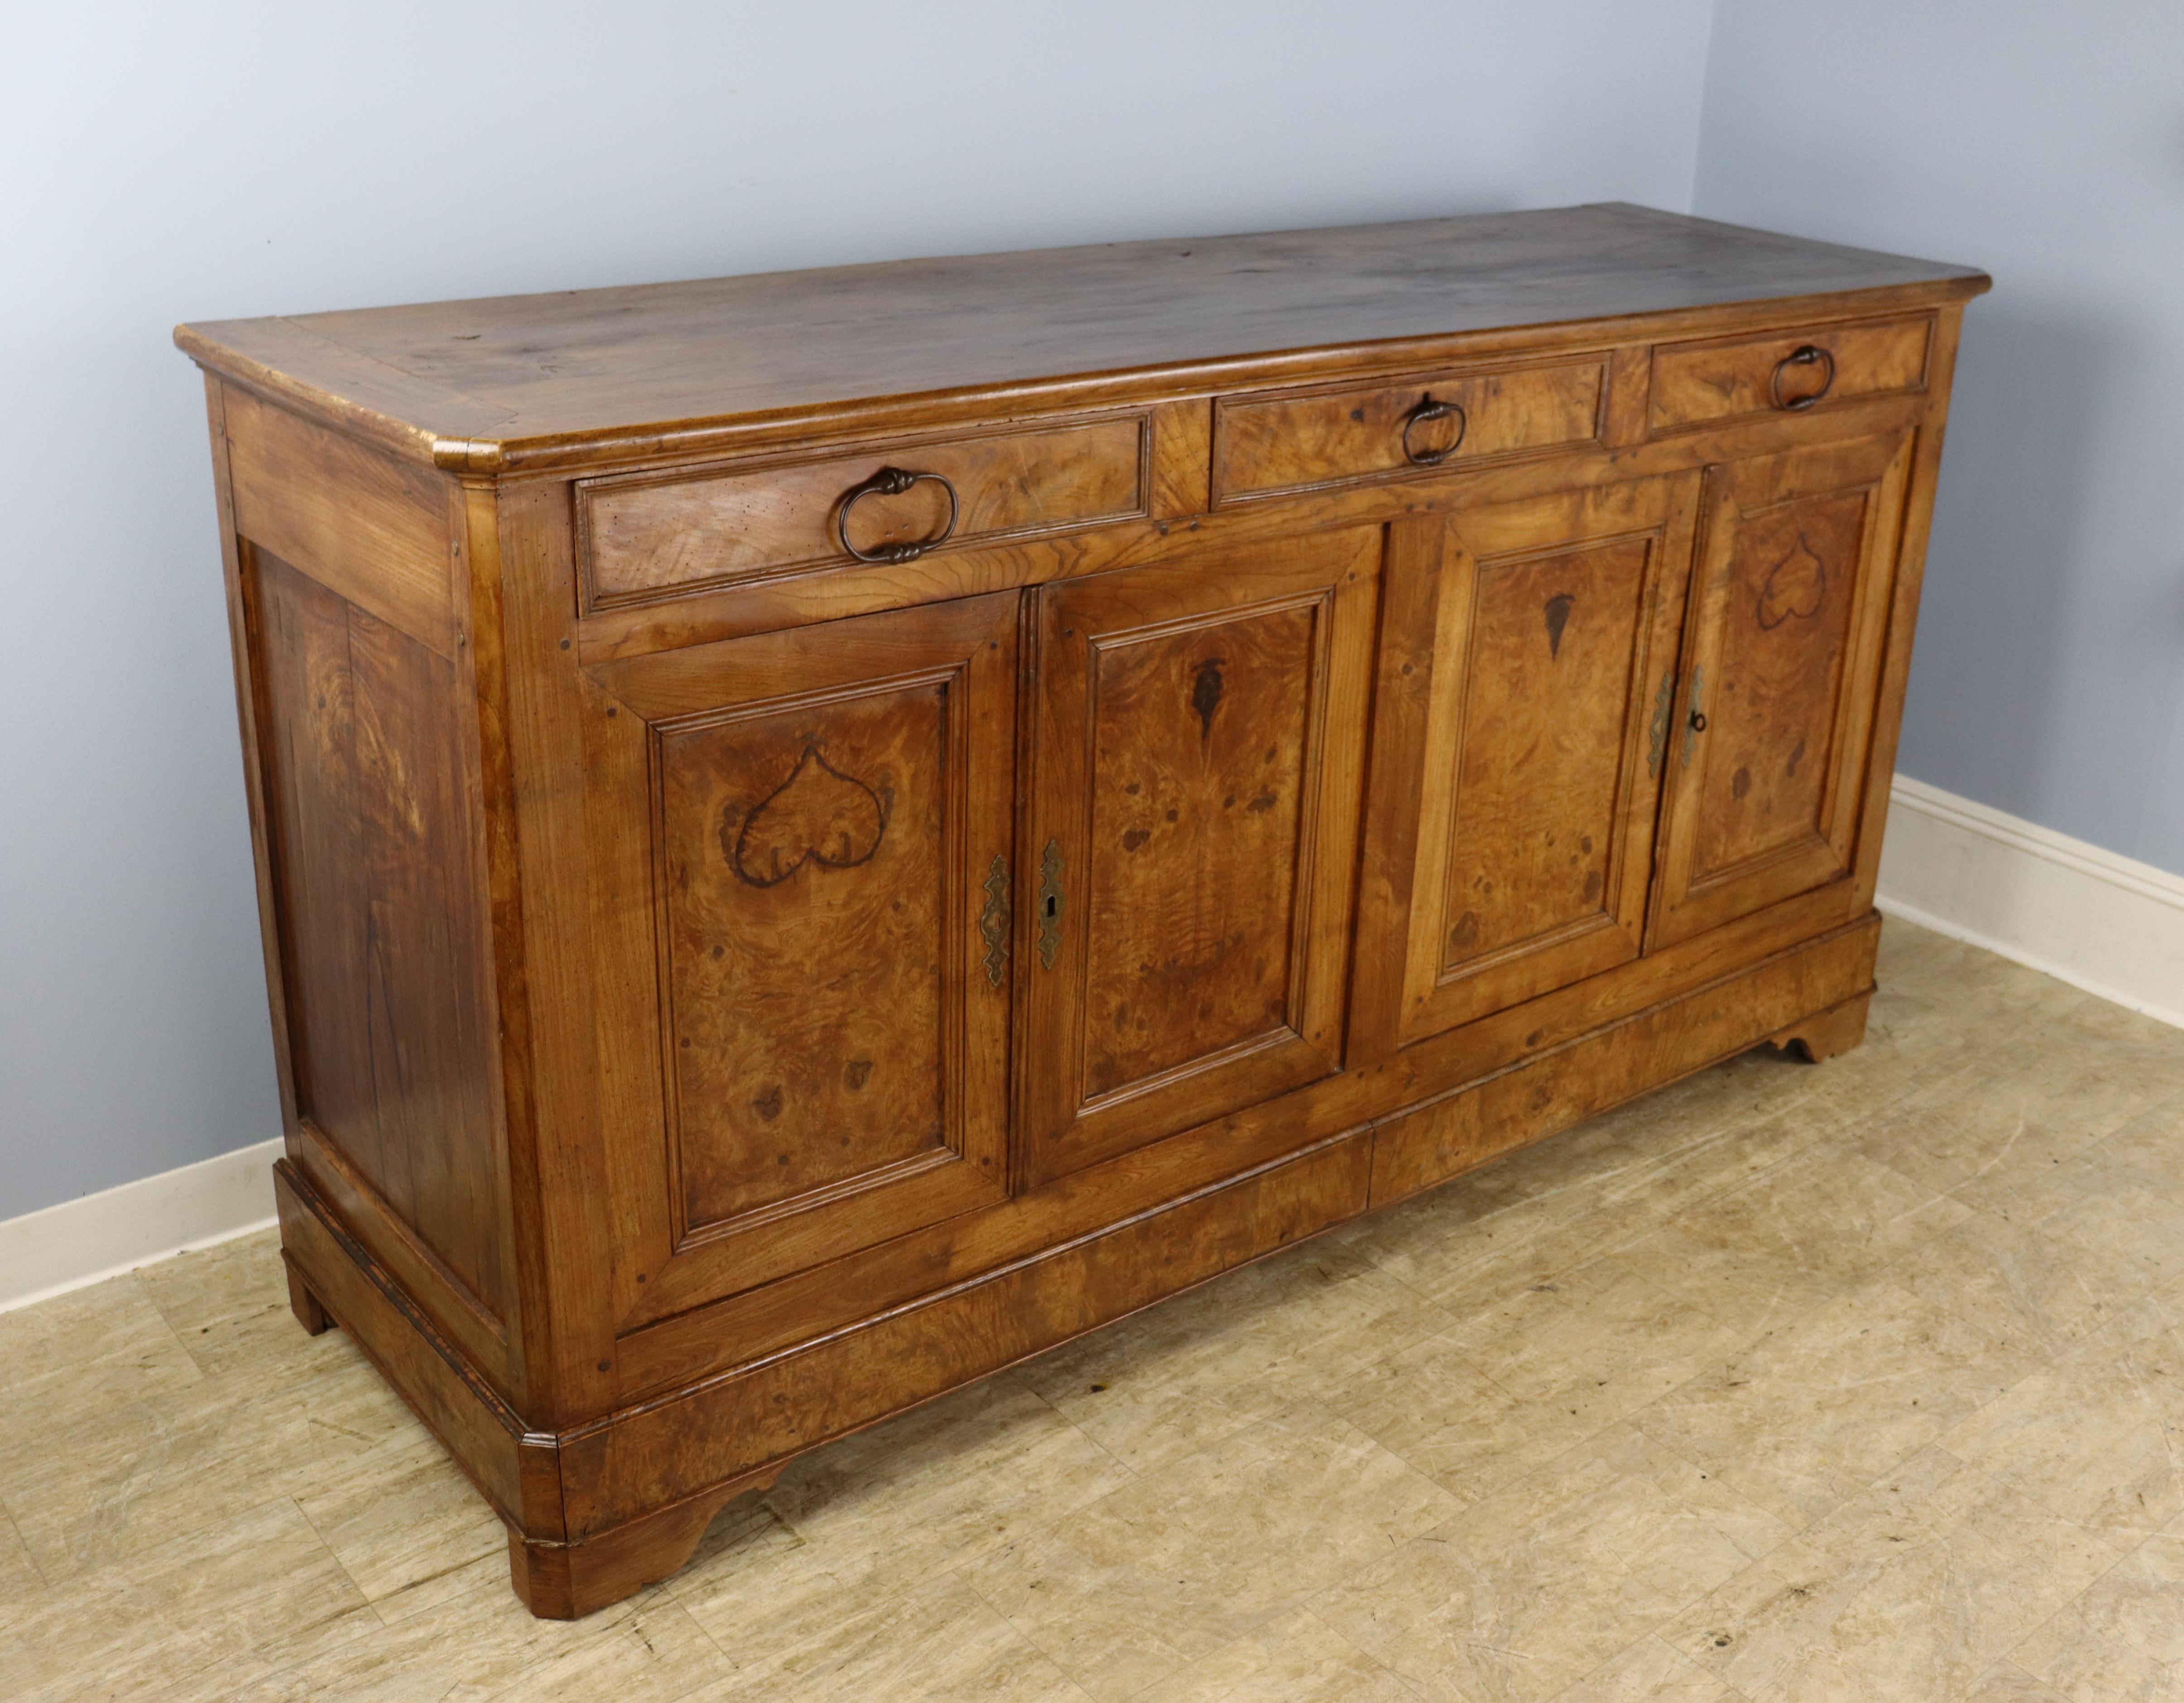 A large four door enfilade or buffet, fashioned out of solid elm burrs. The wood has been matchbooked on the sides, doors and top to charming effect, especially where the grain forms upside down hearts on two of the doors. Wonderful color and patina